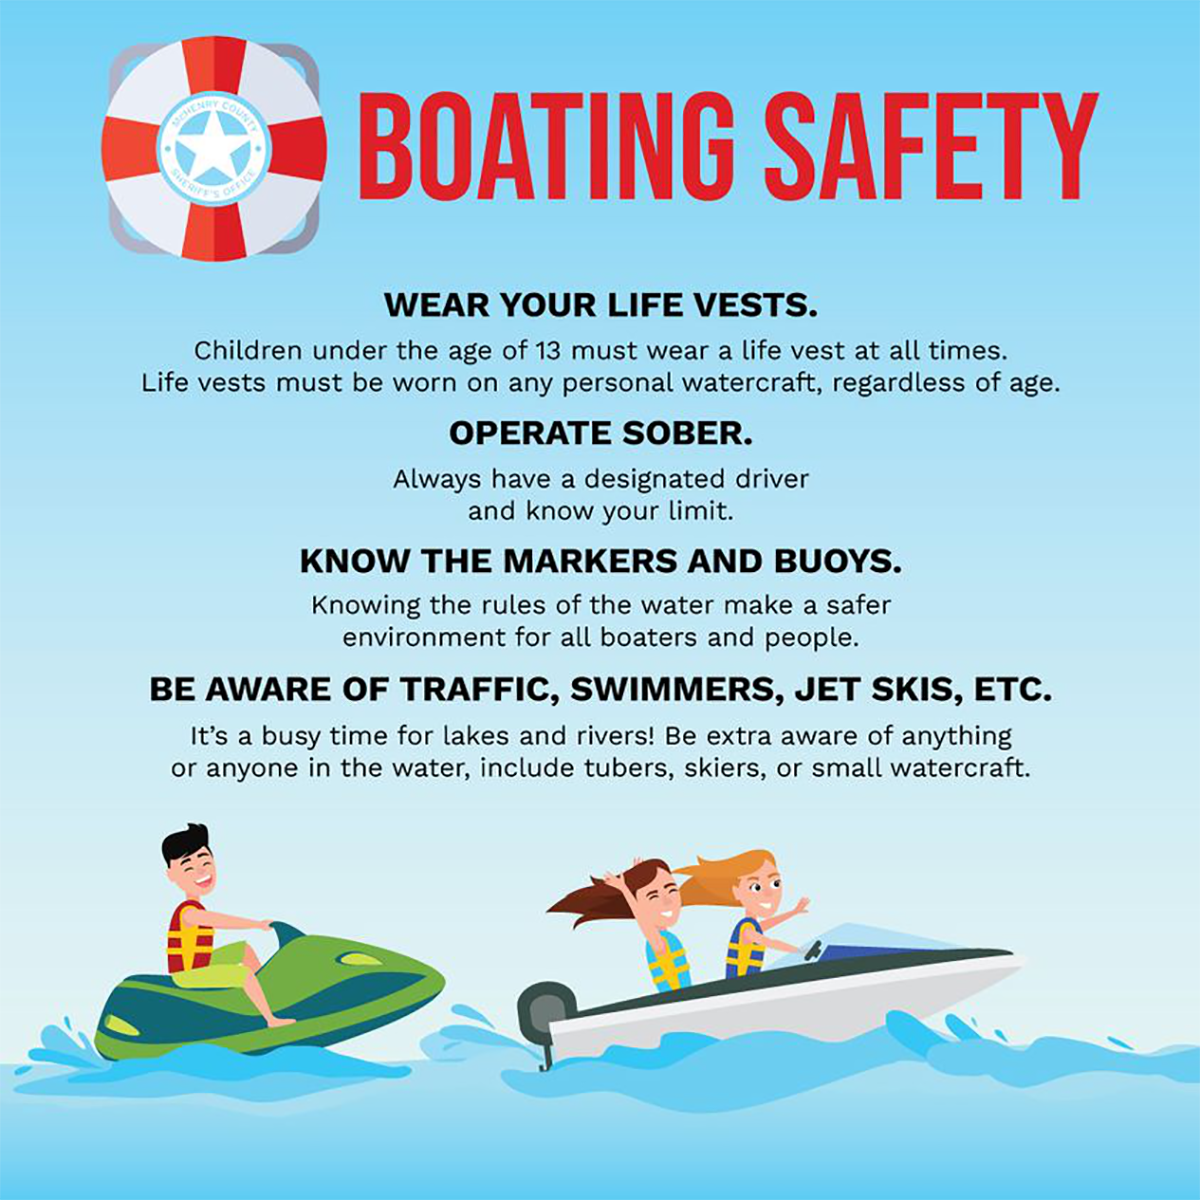 Boating safety: wear life vests, operate sober, know markers and buoys, be aware of traffic, swimmers, jet skis, etc.